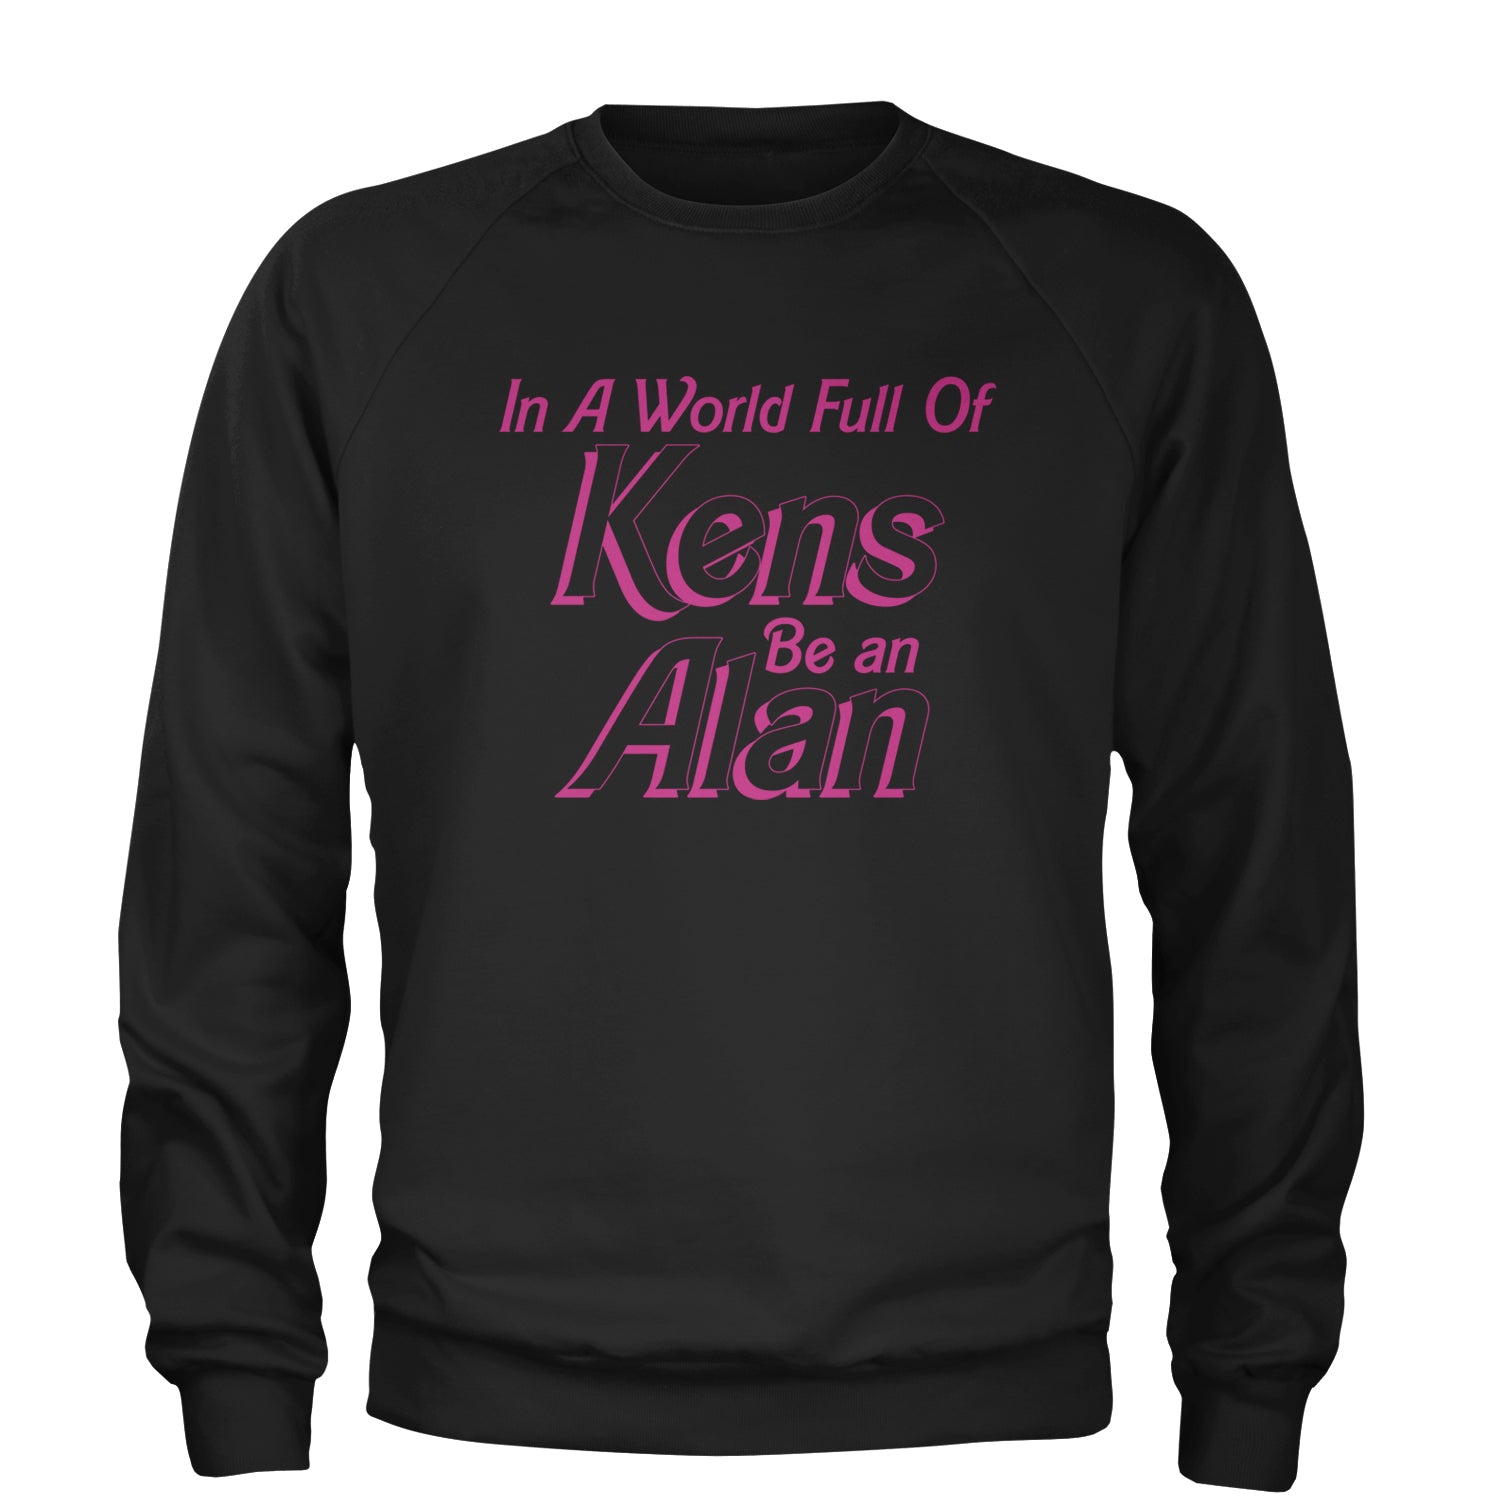 In A World Full Of Kens, Be an Alan Adult Crewneck Sweatshirt